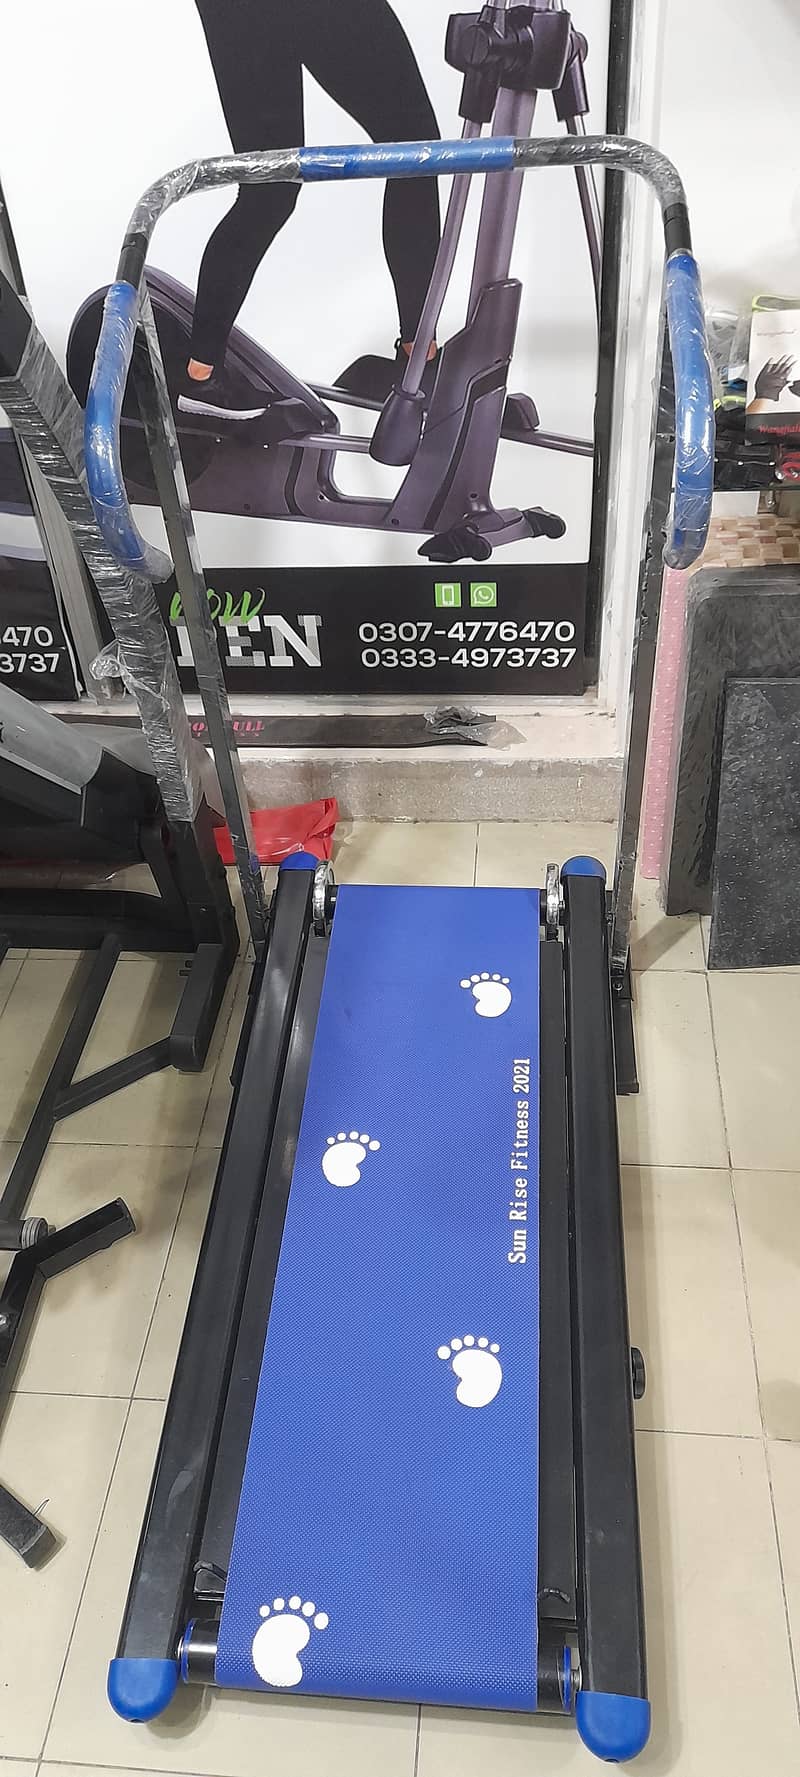 Manual Rollers Treadmill Exercise machine. 03334973737 3